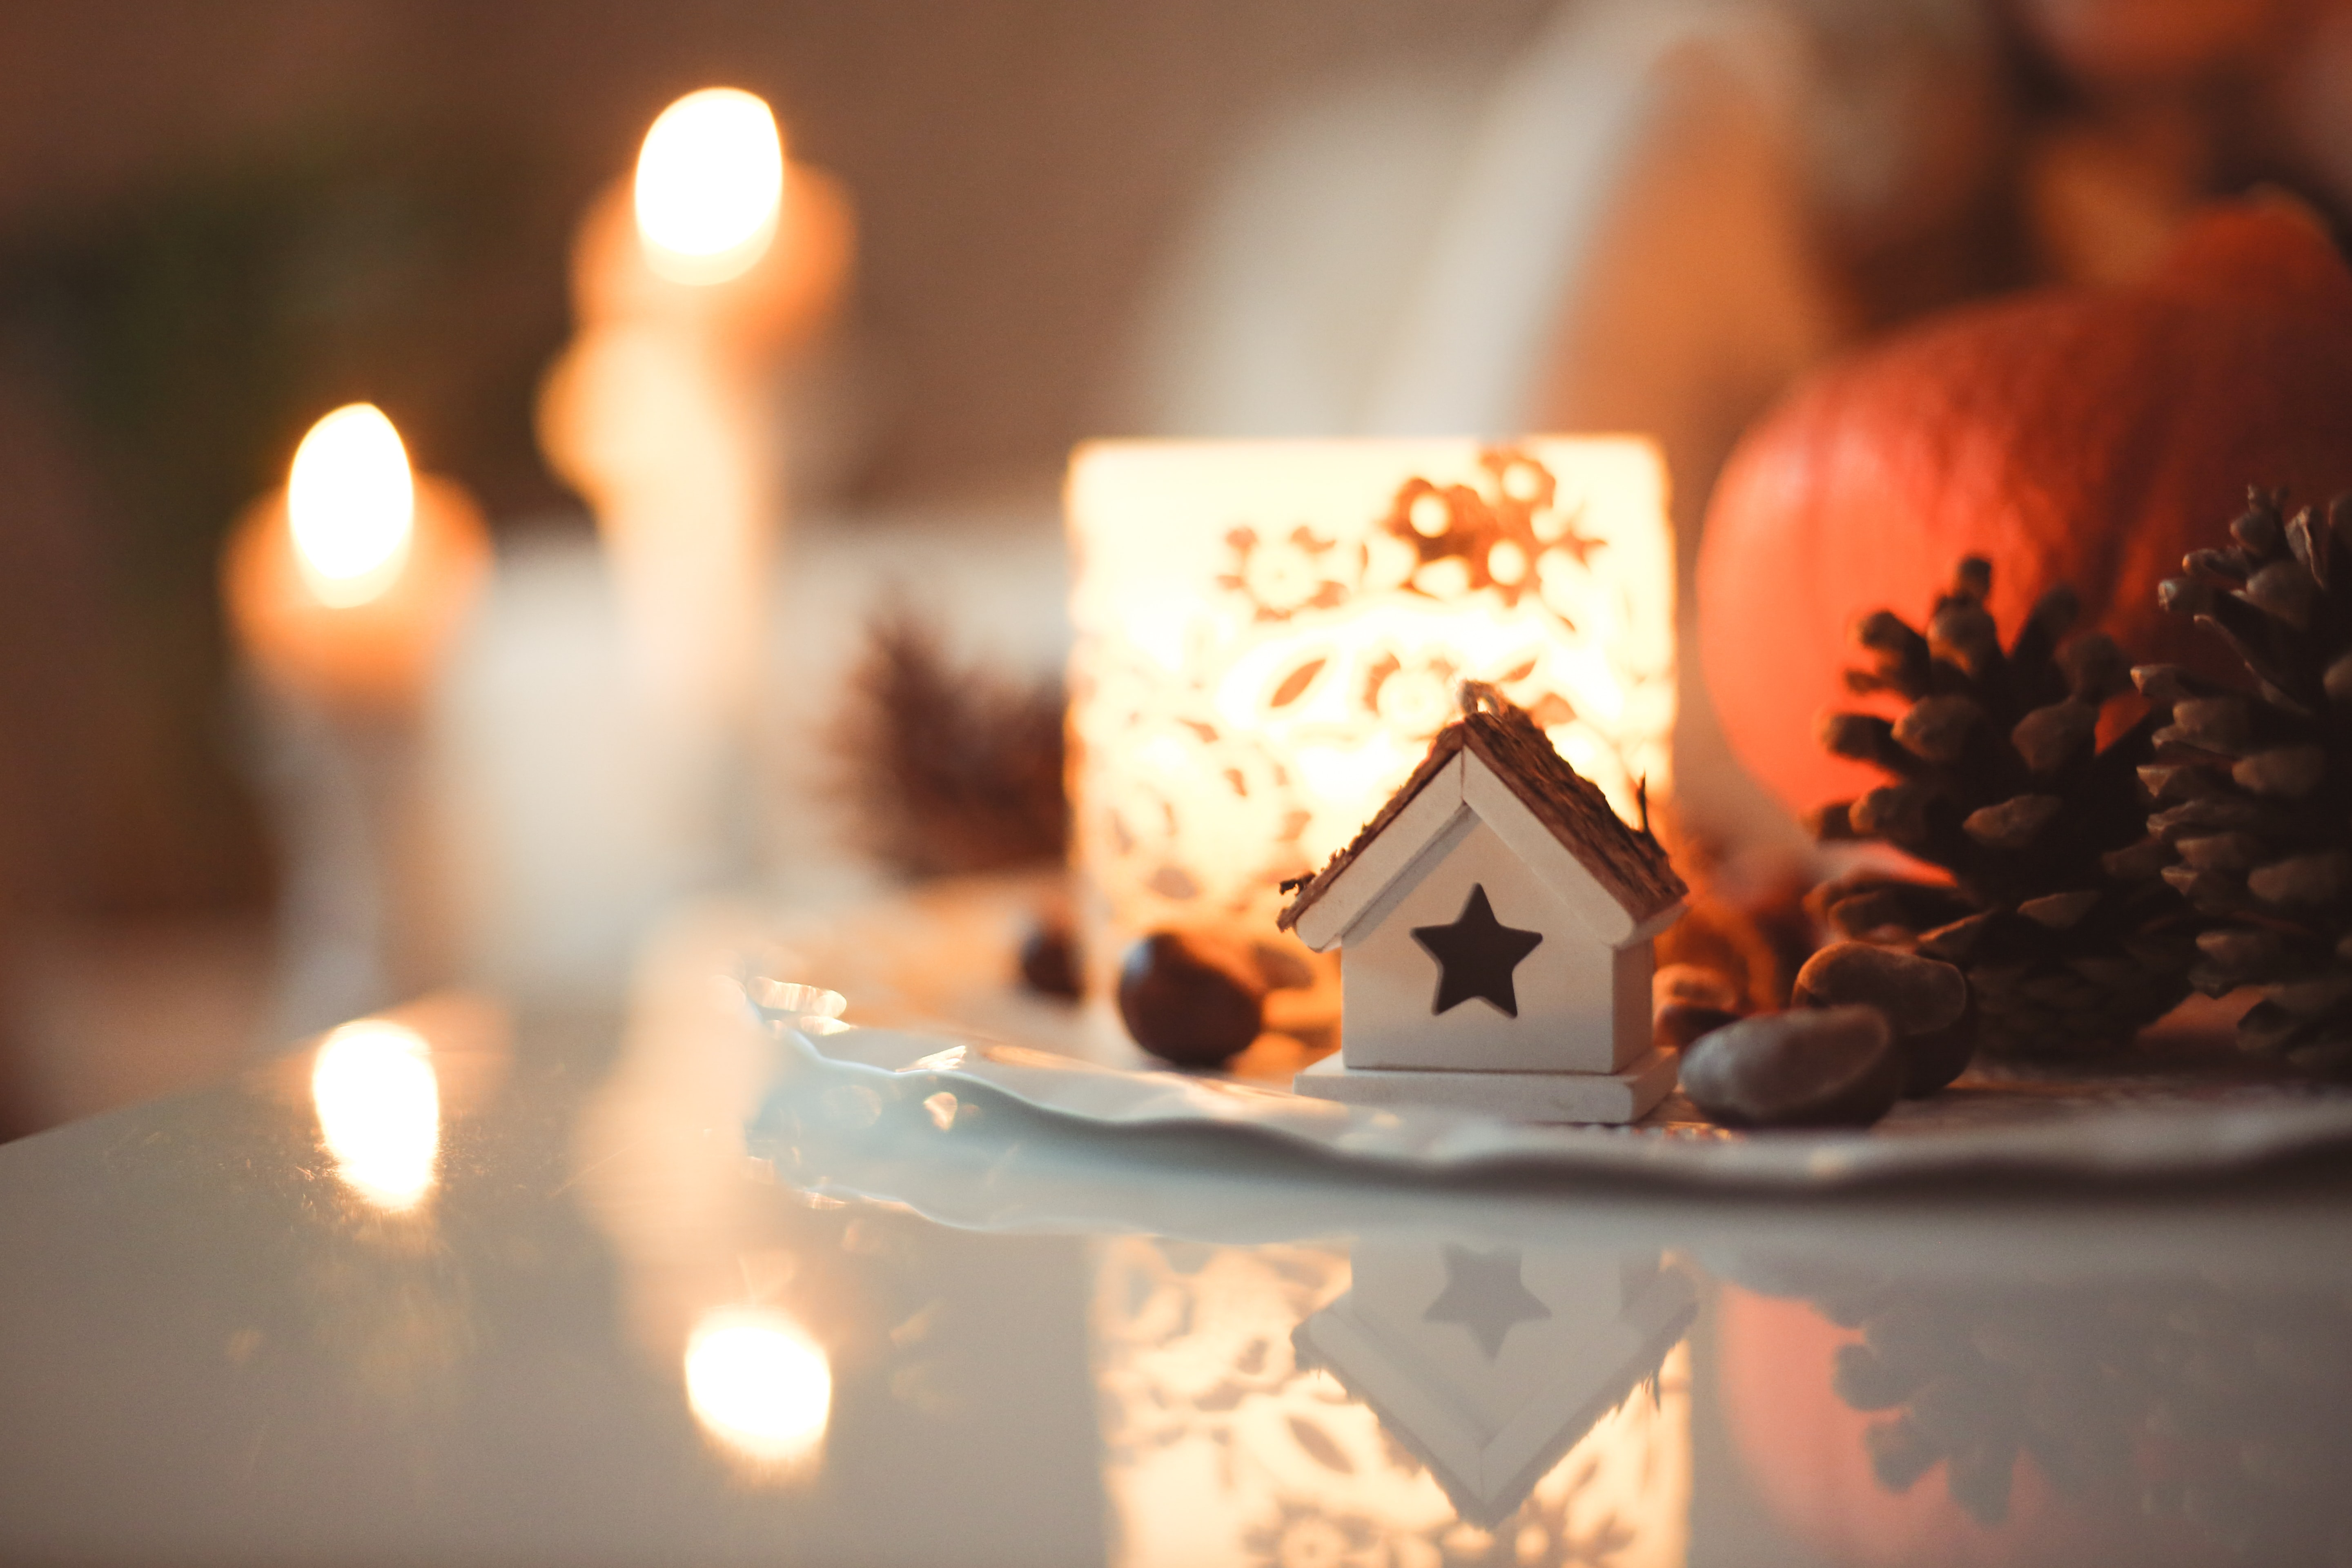 11 Tips for an Autism-Friendly Holiday Season